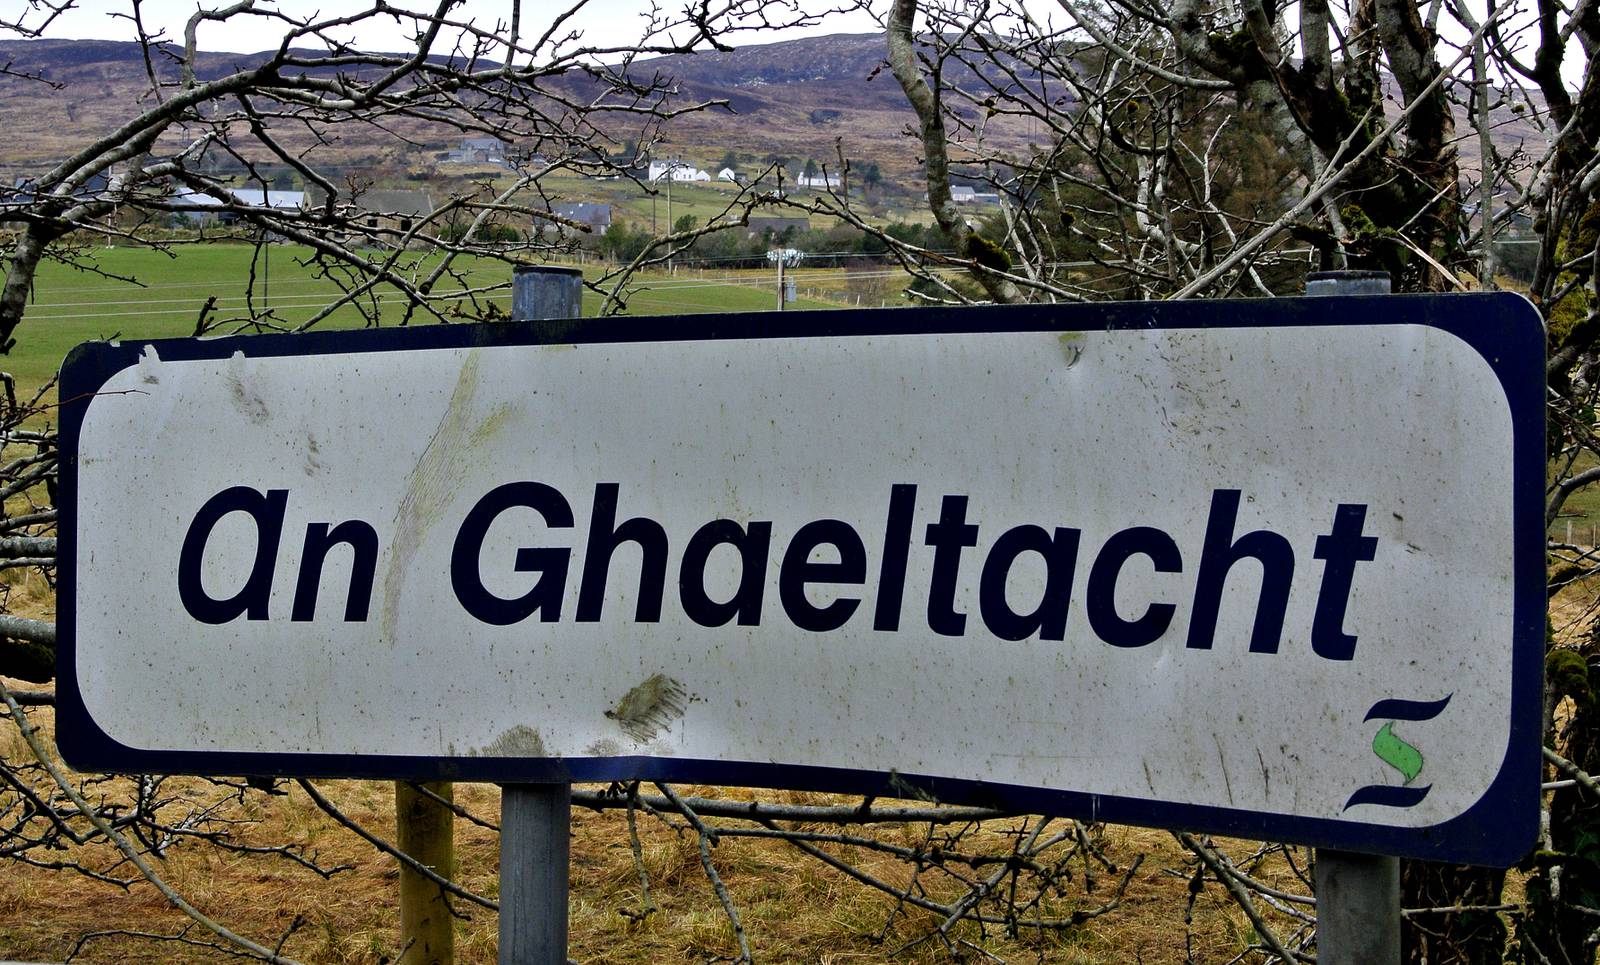 23/03/2013 - Archive - stock - General View - GV  -  An Ghaeltacht sign near Glenties in Co. Donegal.
Photo: David Sleator/THE IRISH TIMES